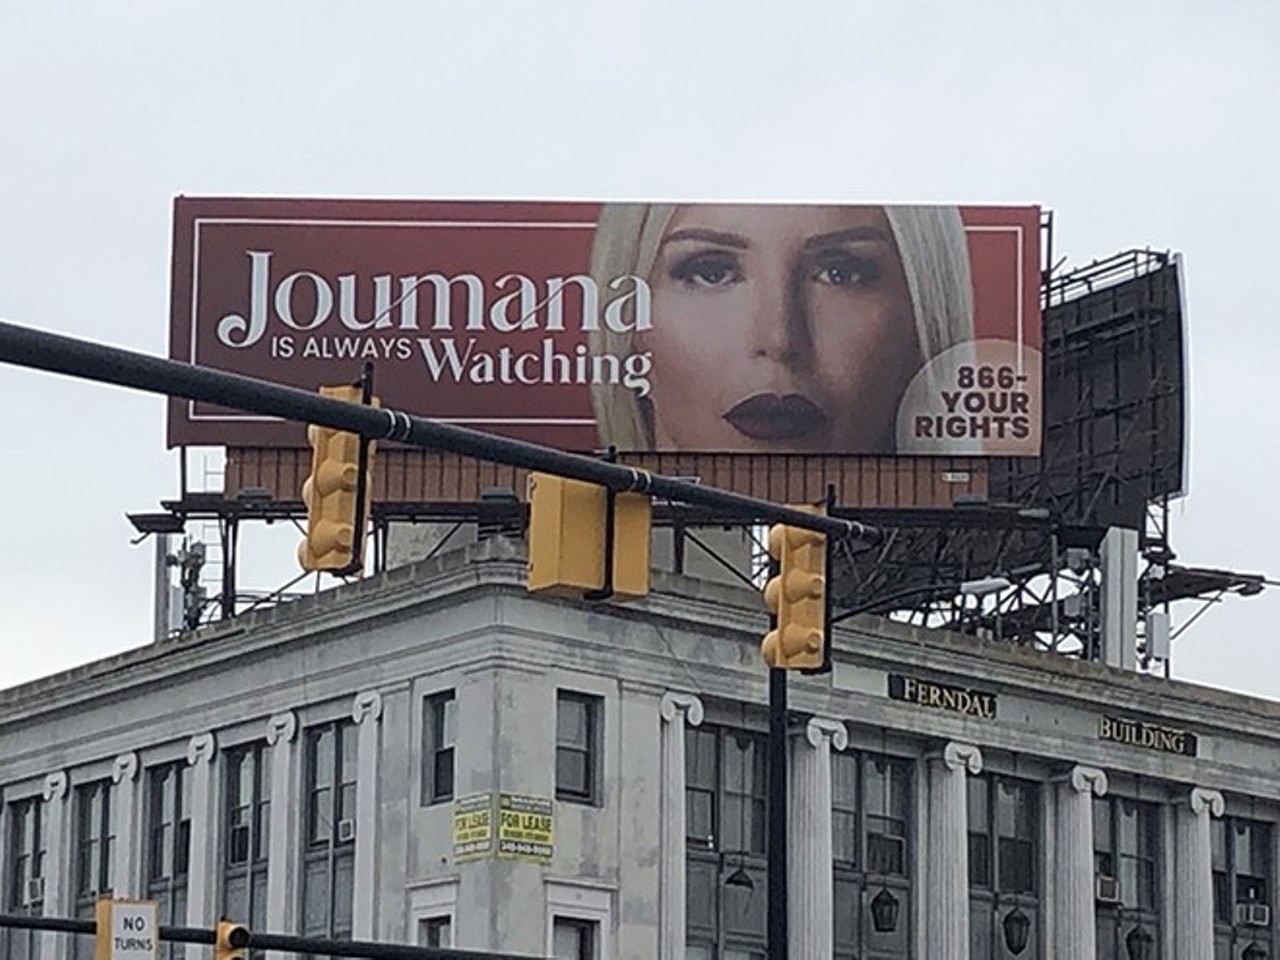 Celebrity lawyers
Sure, every city in the U.S. has their own Better Call Saul, but Detroit’s celebrity lawyers have to be among the most eccentric, from Geoffrey Fieger’s unsuccessful run for governor, to Mike Morse photoshopping himself on a billboard to look like he survived a physical fight, to the glamor and mystique of Joumana Kayrouz.